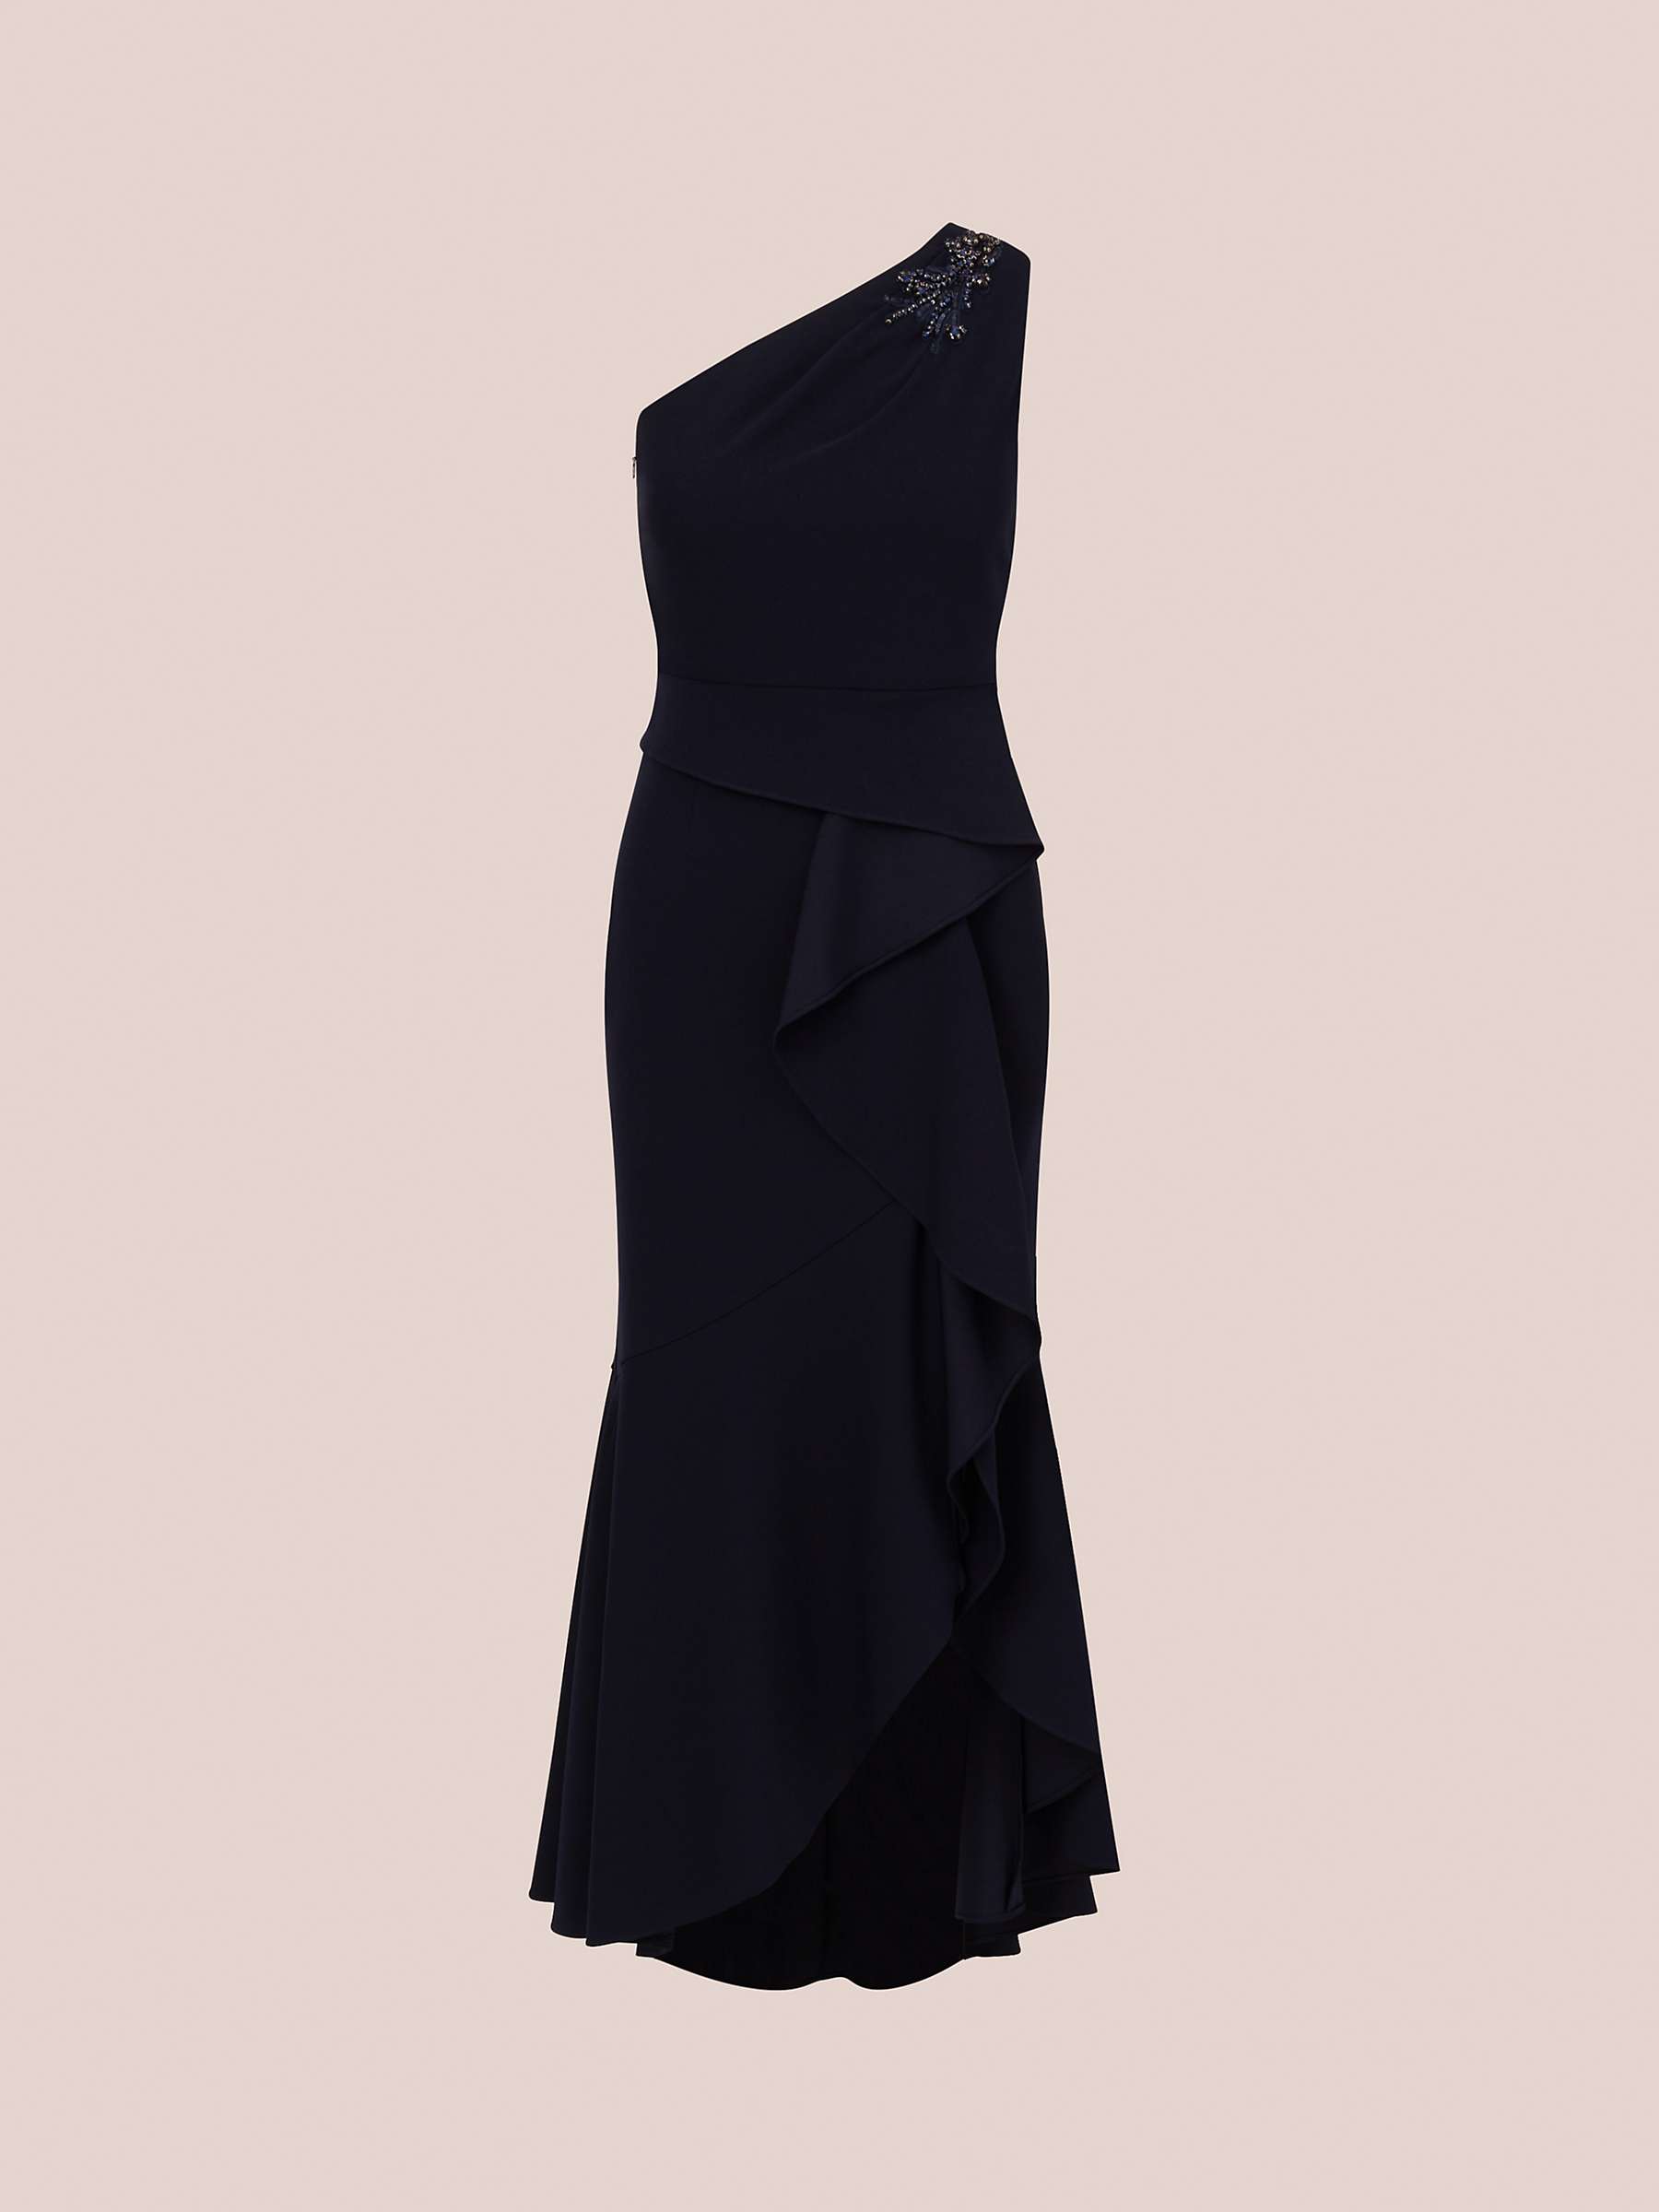 Buy Adrianna Papell Studio Beaded Knit Crepe Maxi Dress, Midnight Online at johnlewis.com